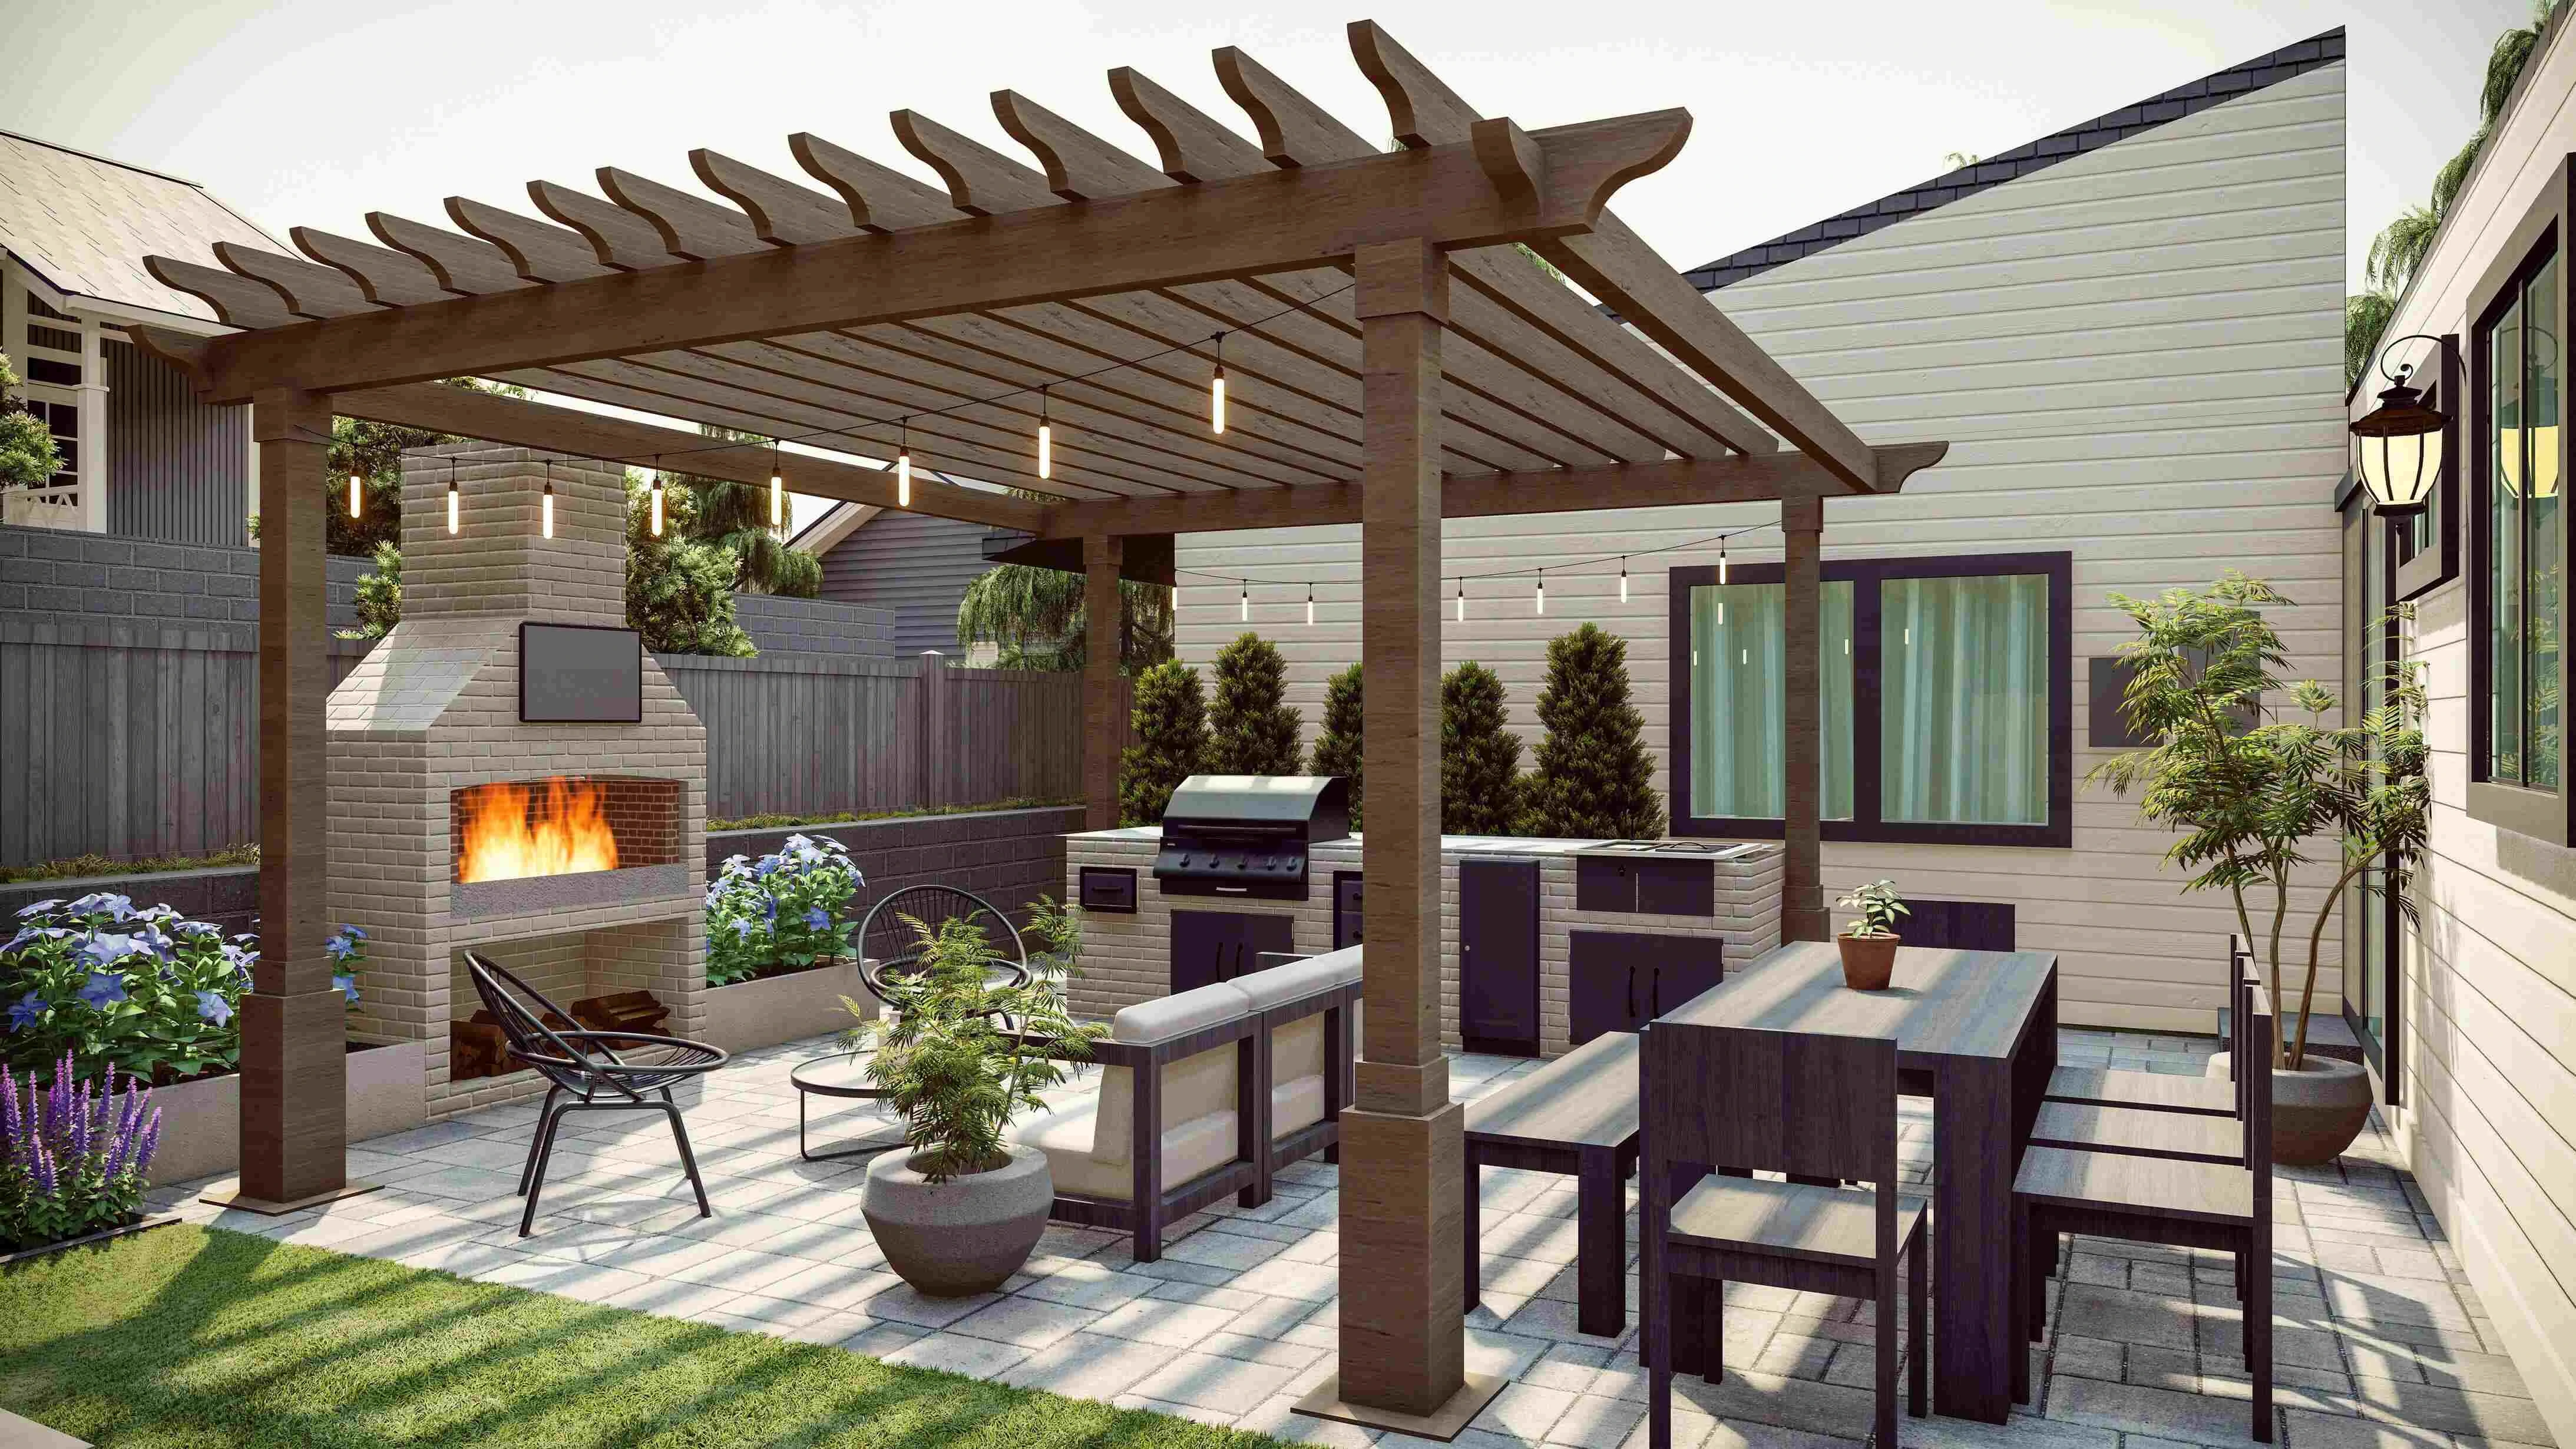 backyard patio with pergola shading, an integrated fireplace for warmth, and an outdoor kitchen, surrounded by vibrant plant life.